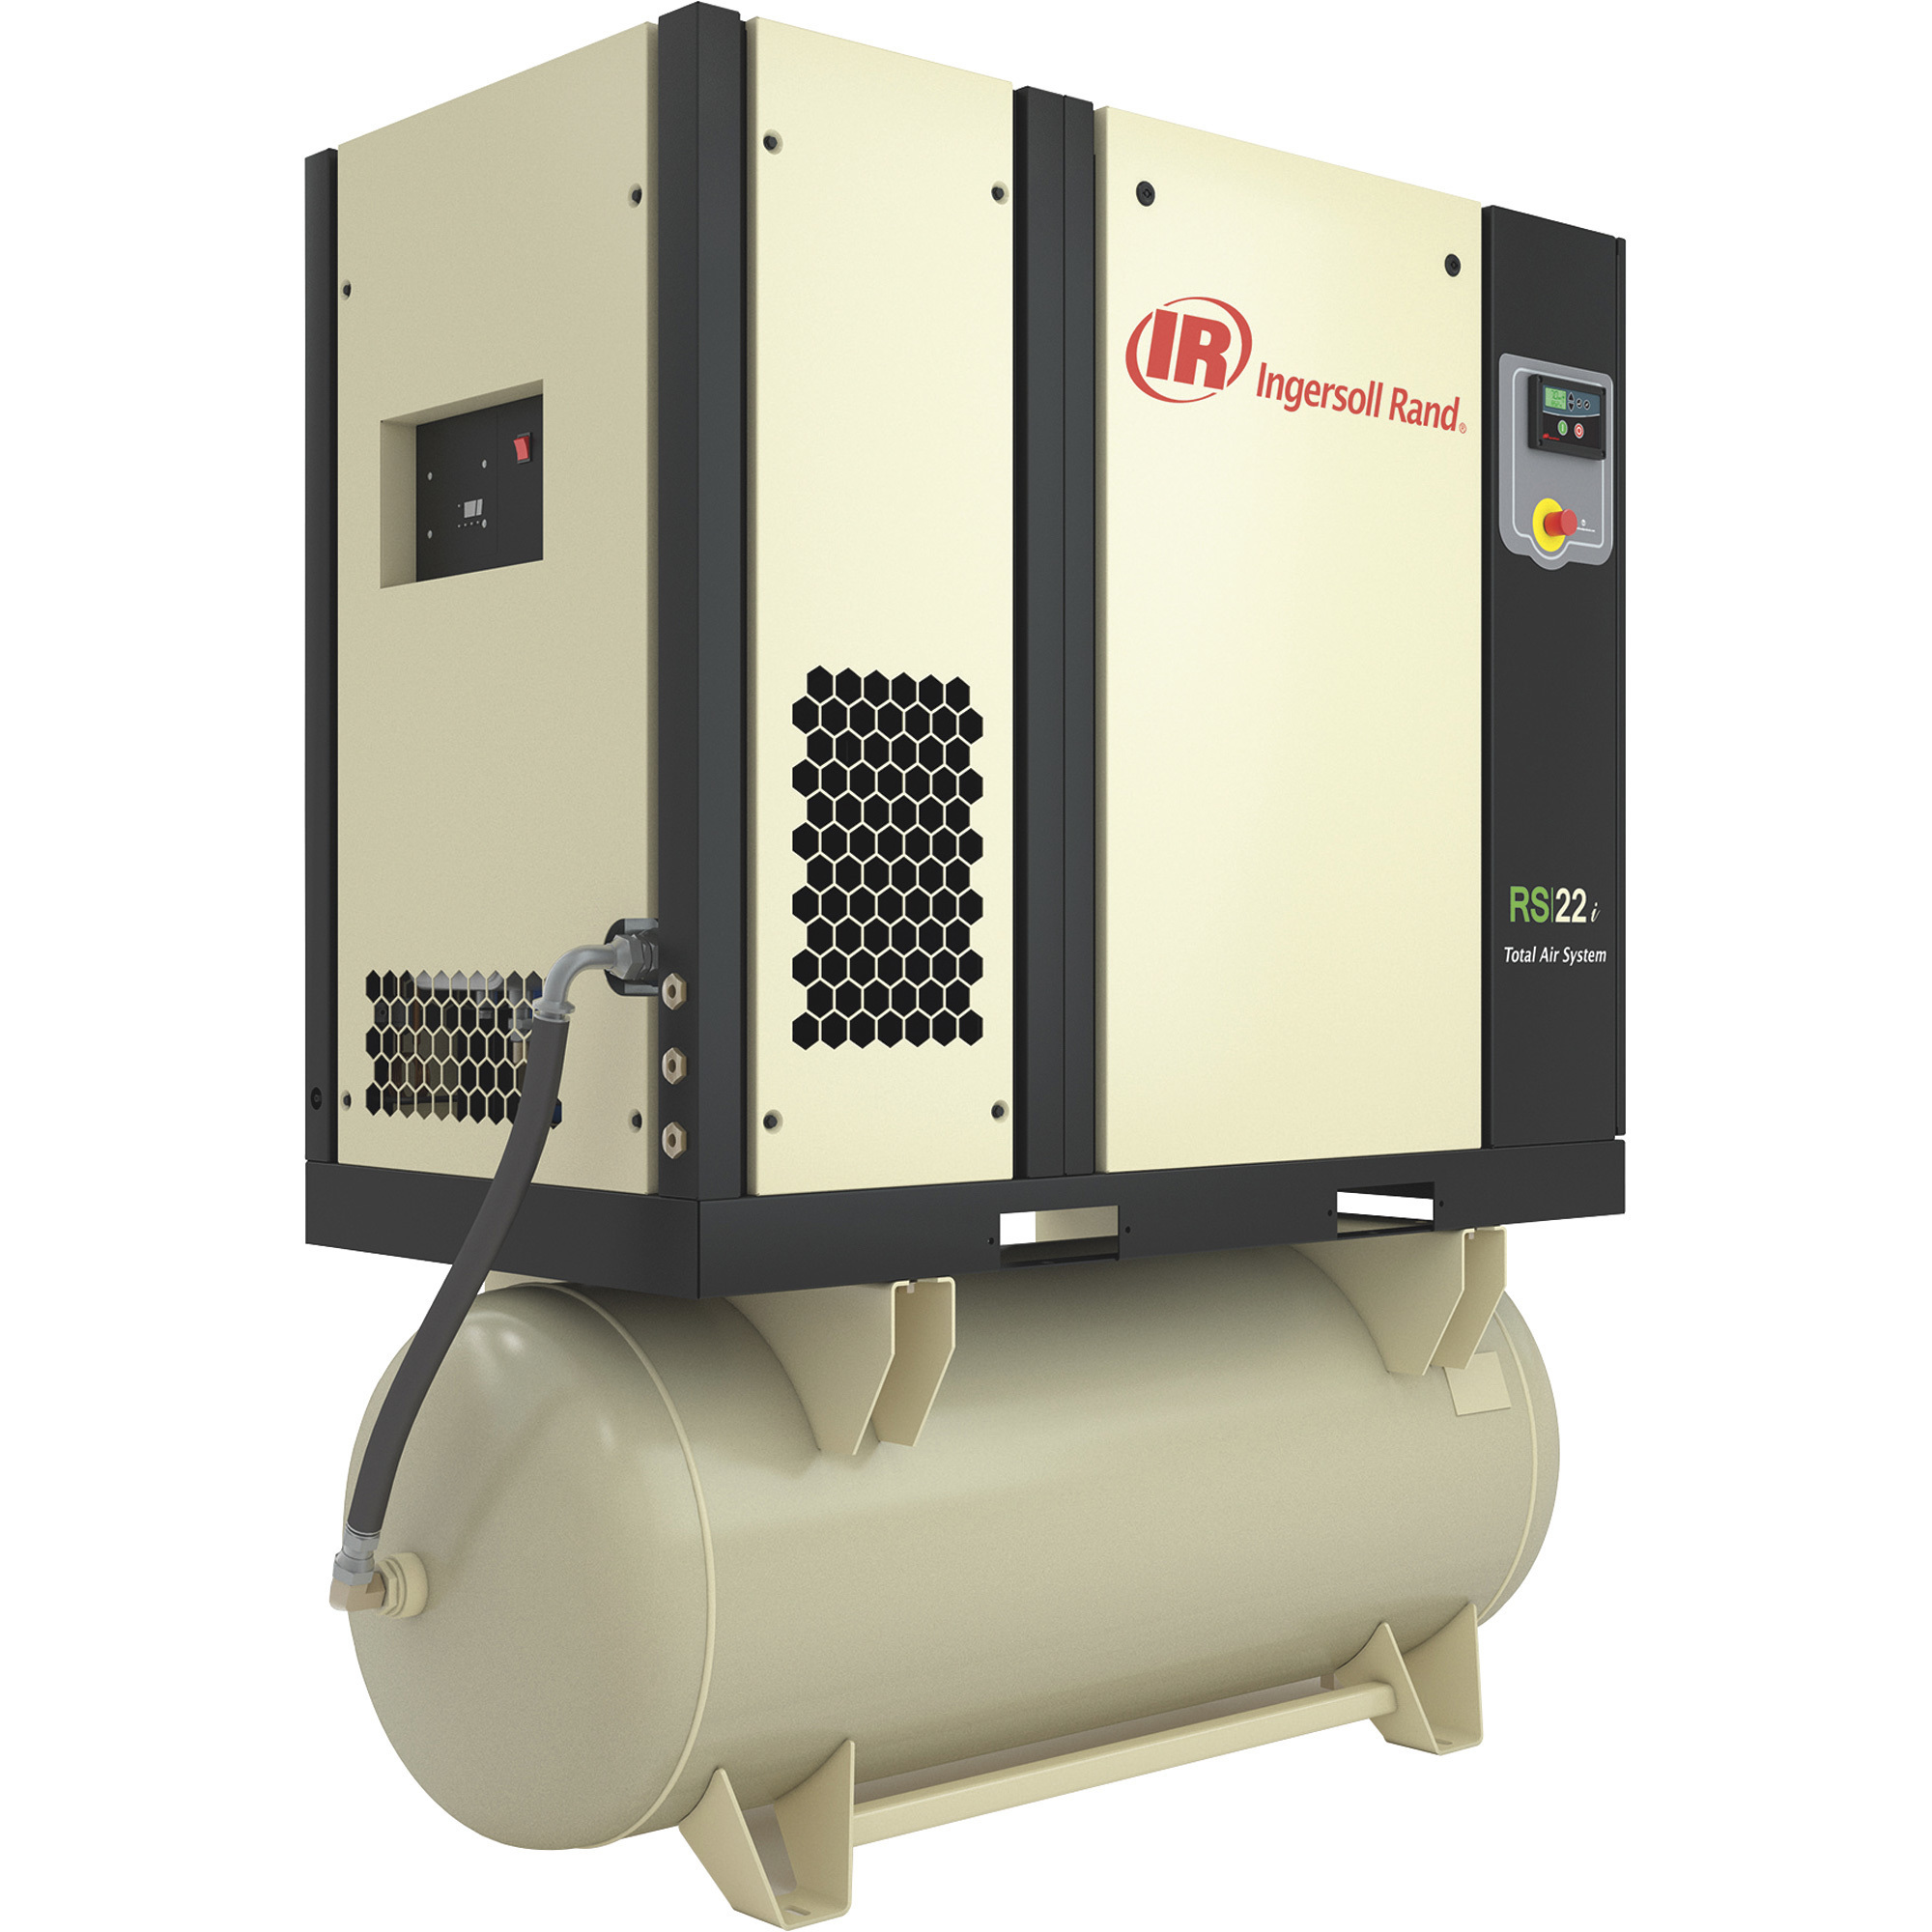 Ingersoll Rand Next Generation R-Series Oil-Flooded Rotary Screw Air Compressor With Integrated Air Dryer, 25 HP, 460 Volt, 3 Phase, 120 Gallon